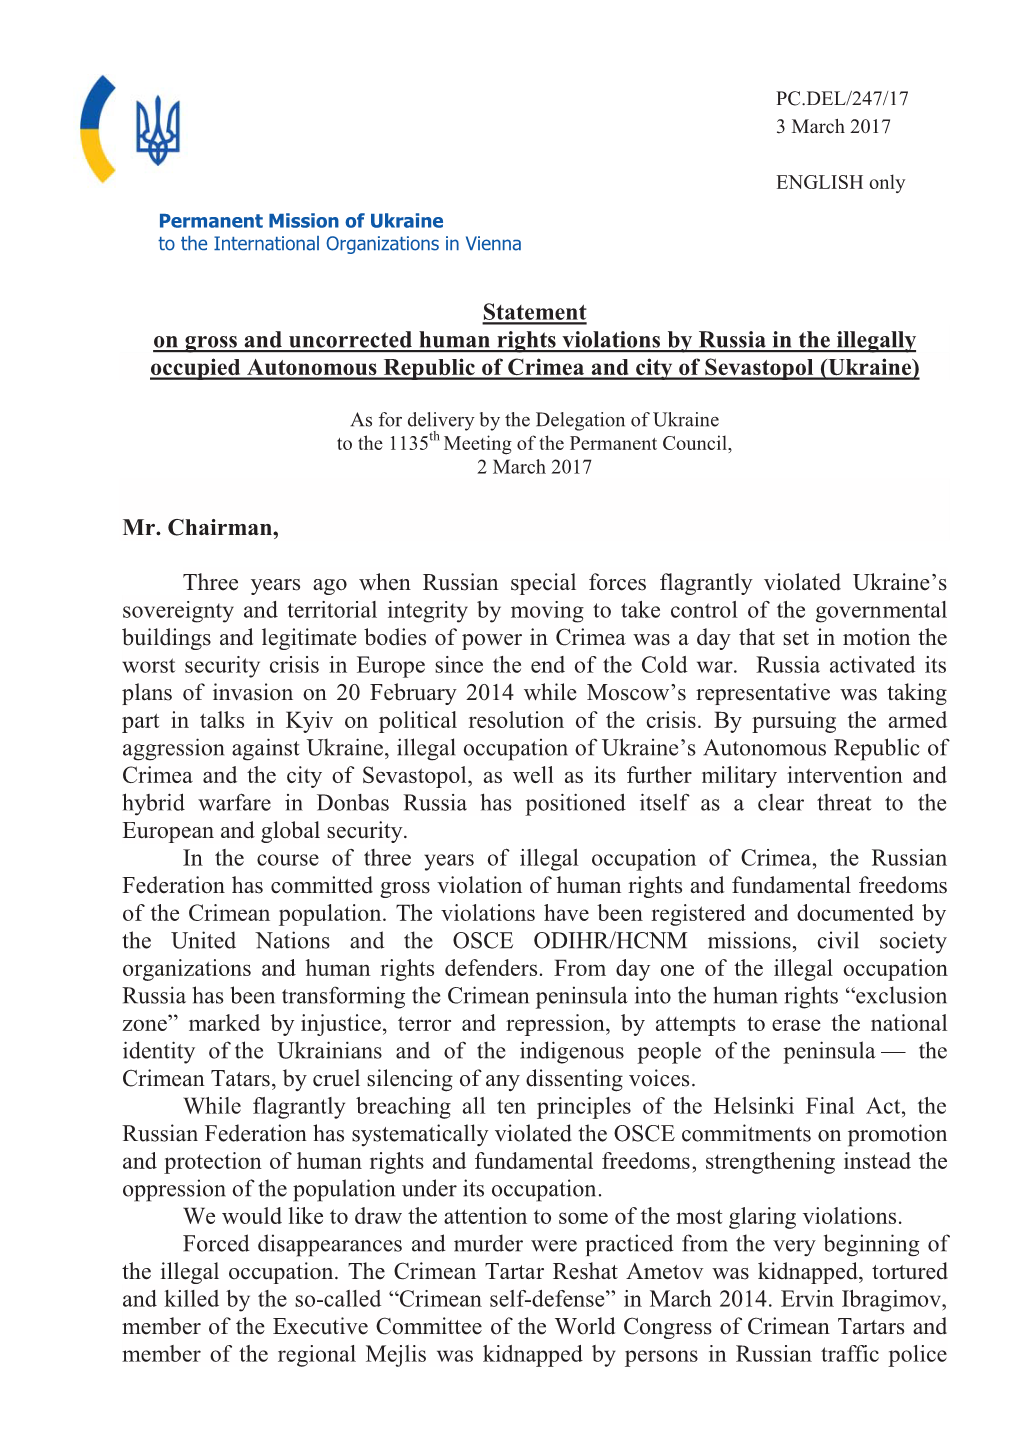 Statement on Gross and Uncorrected Human Rights Violations by Russia in the Illegally Occupied Autonomous Republic of Crimea and City of Sevastopol (Ukraine)